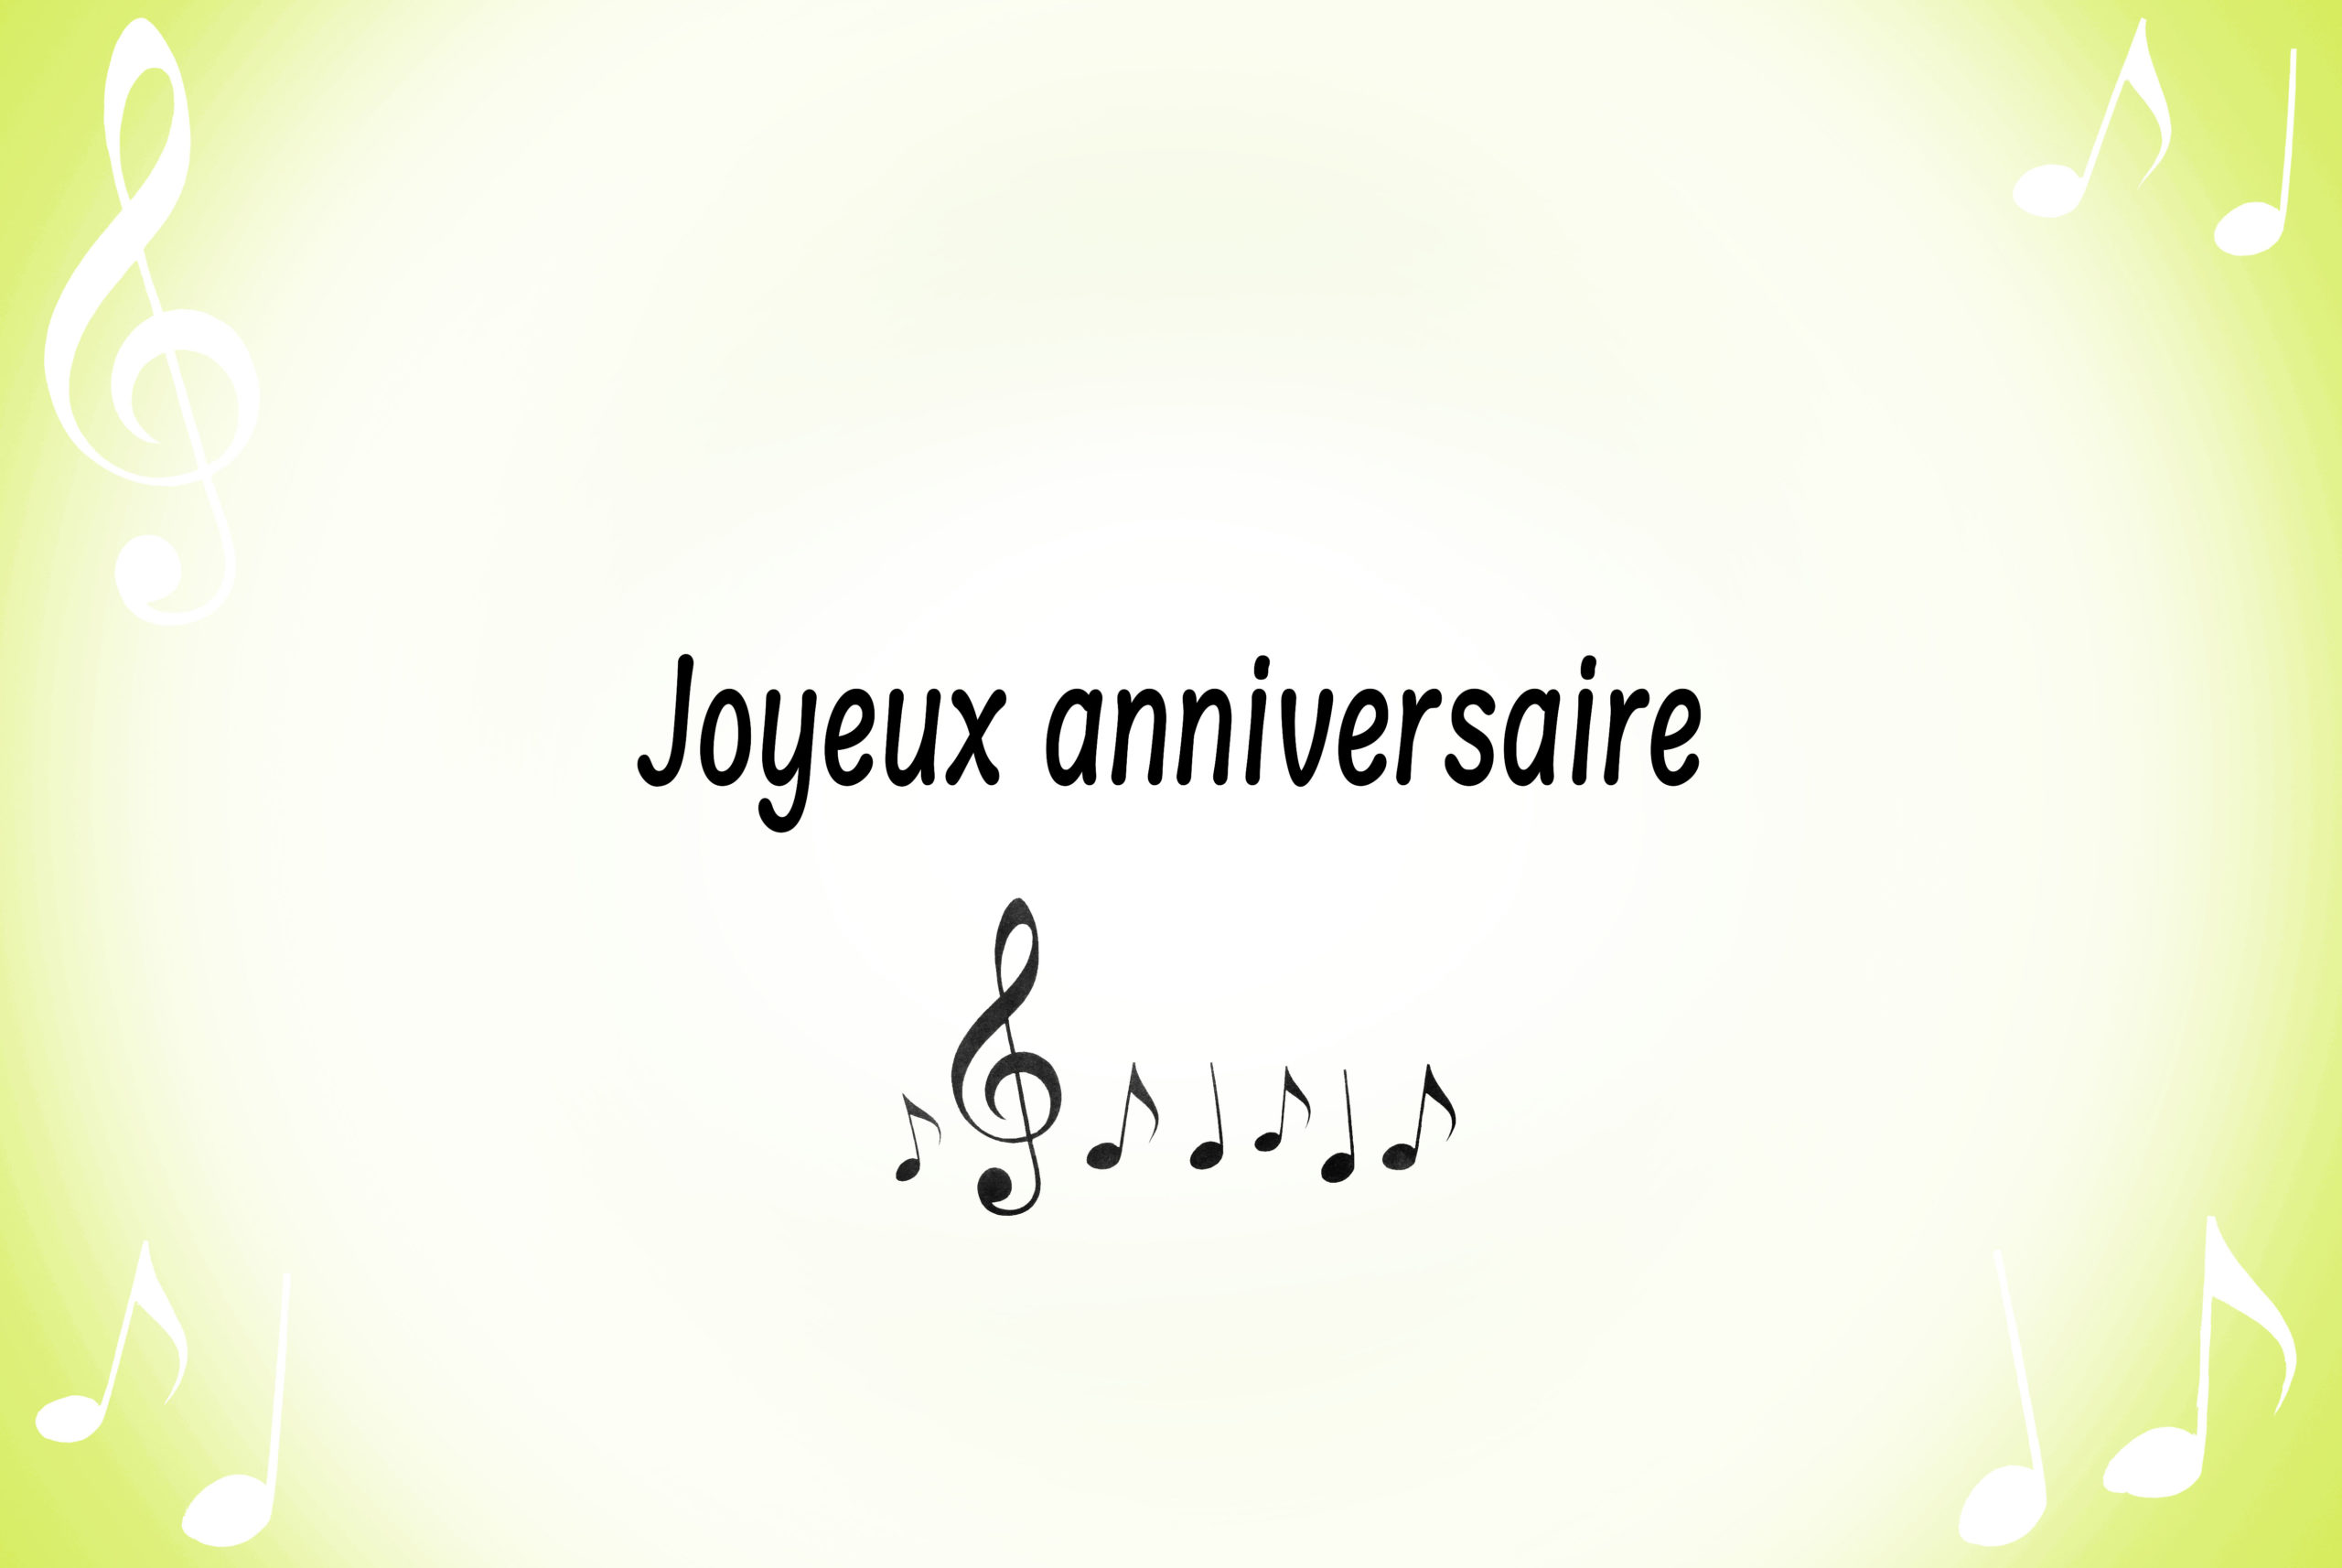 Joyeux anniversaire - Lawless French Expression - Happy Birthday in French